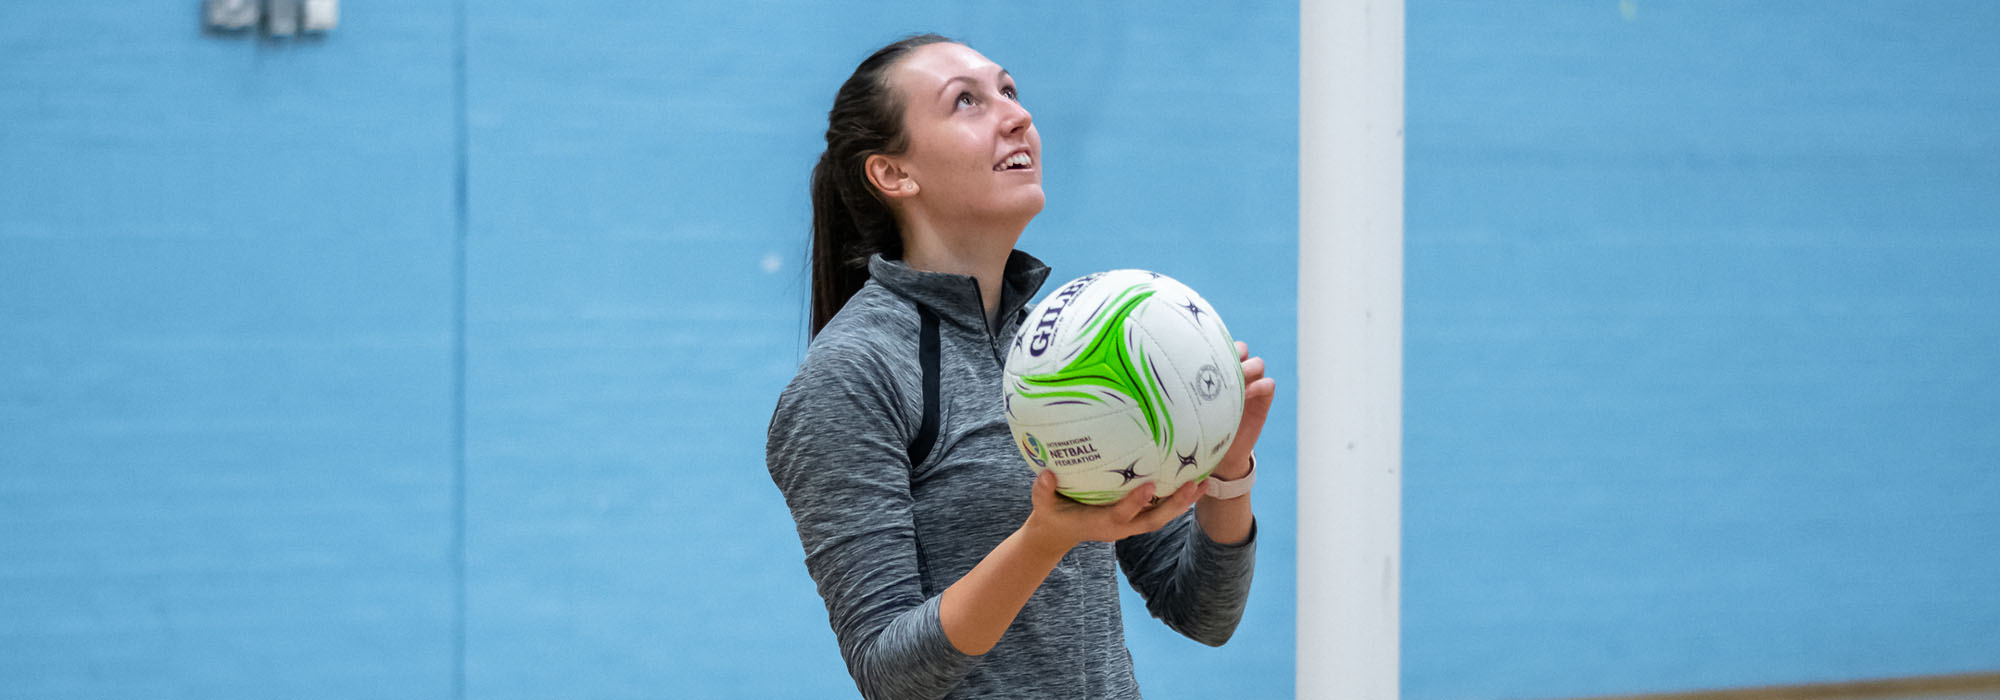 female netball player in the sports hall, holding a netball and looking up to the goal. she is wearing a grey top and has her long hair tied back,